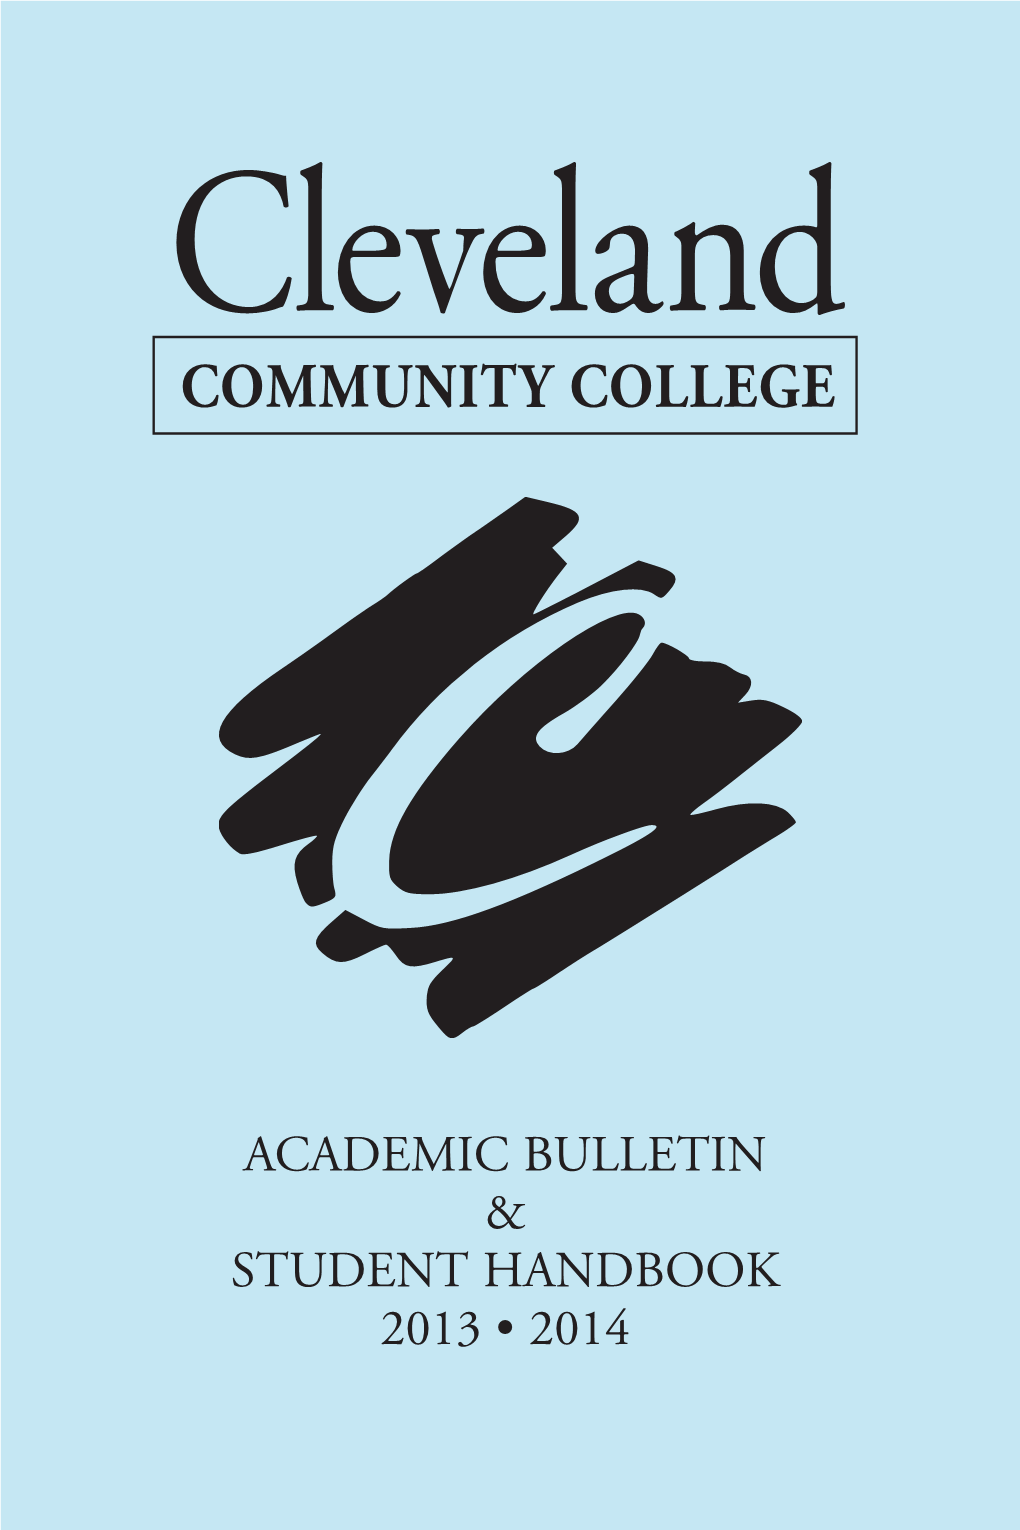 Cleveland COMMUNITY COLLEGE